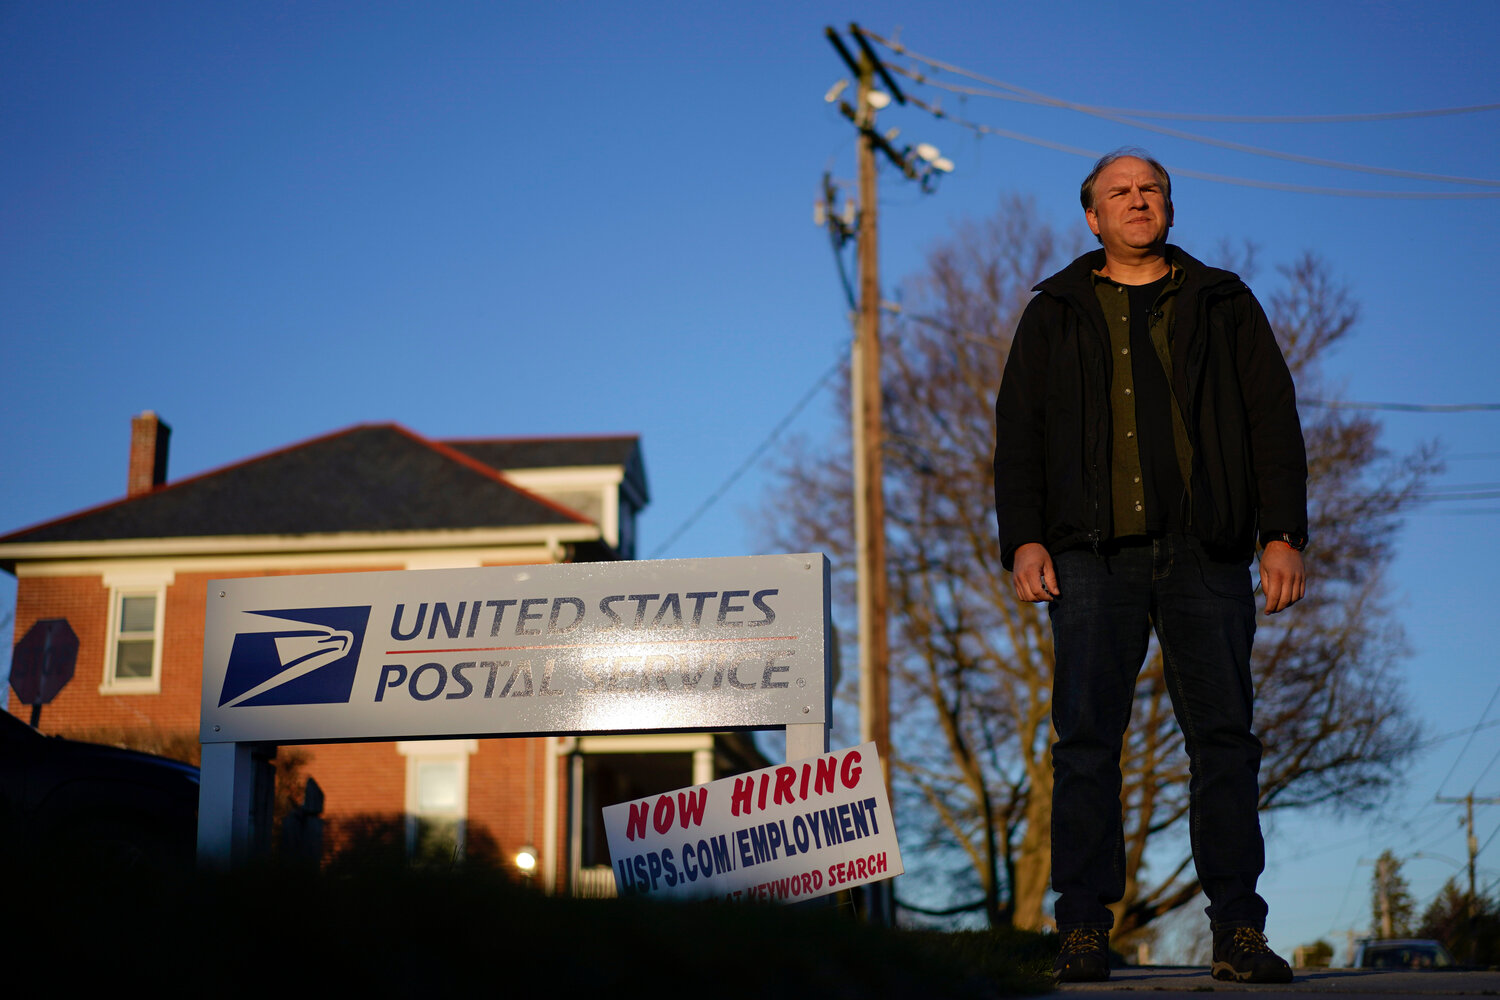 Gerald Groff, a former postal worker whose case is being argued before the Supreme Court, during a March 8 television interview near a "Now Hiring" sign posted at the roadside at the United State Postal Service in Quarryville, Pennsylvania.